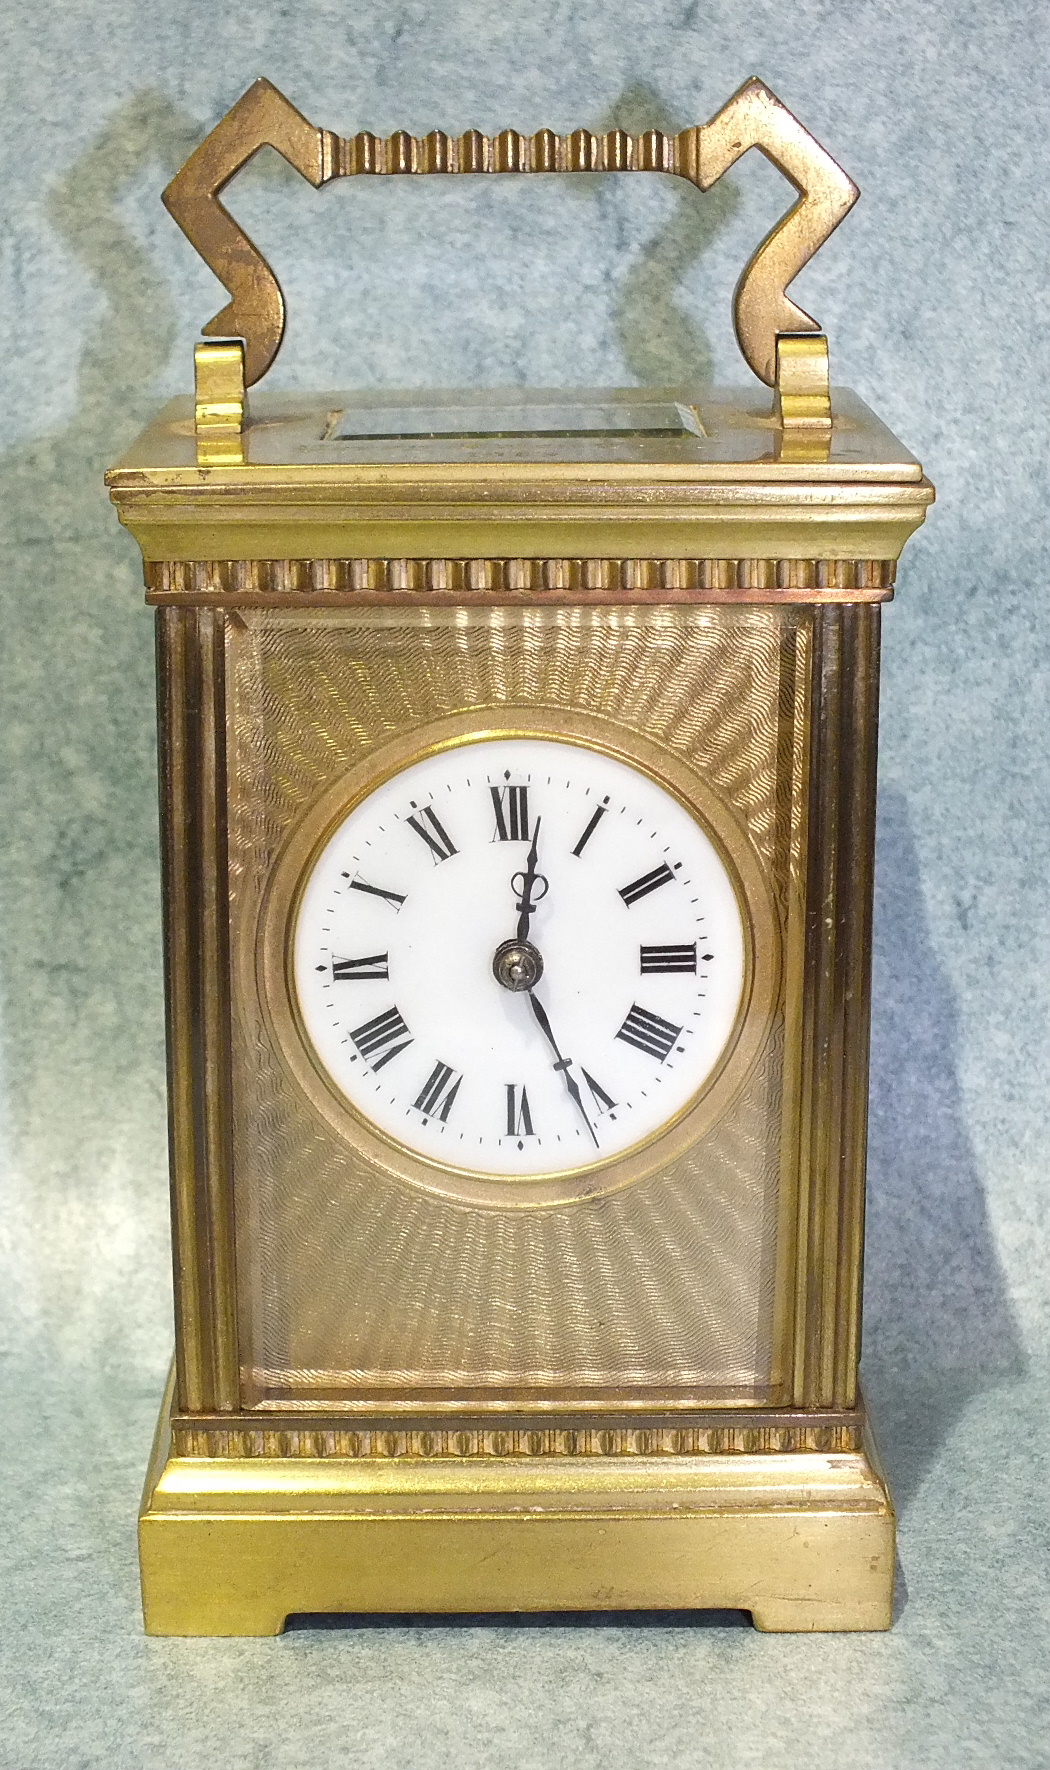 A 19th century French carriage clock, the engine-turned gilt metal face with circular enamel dial